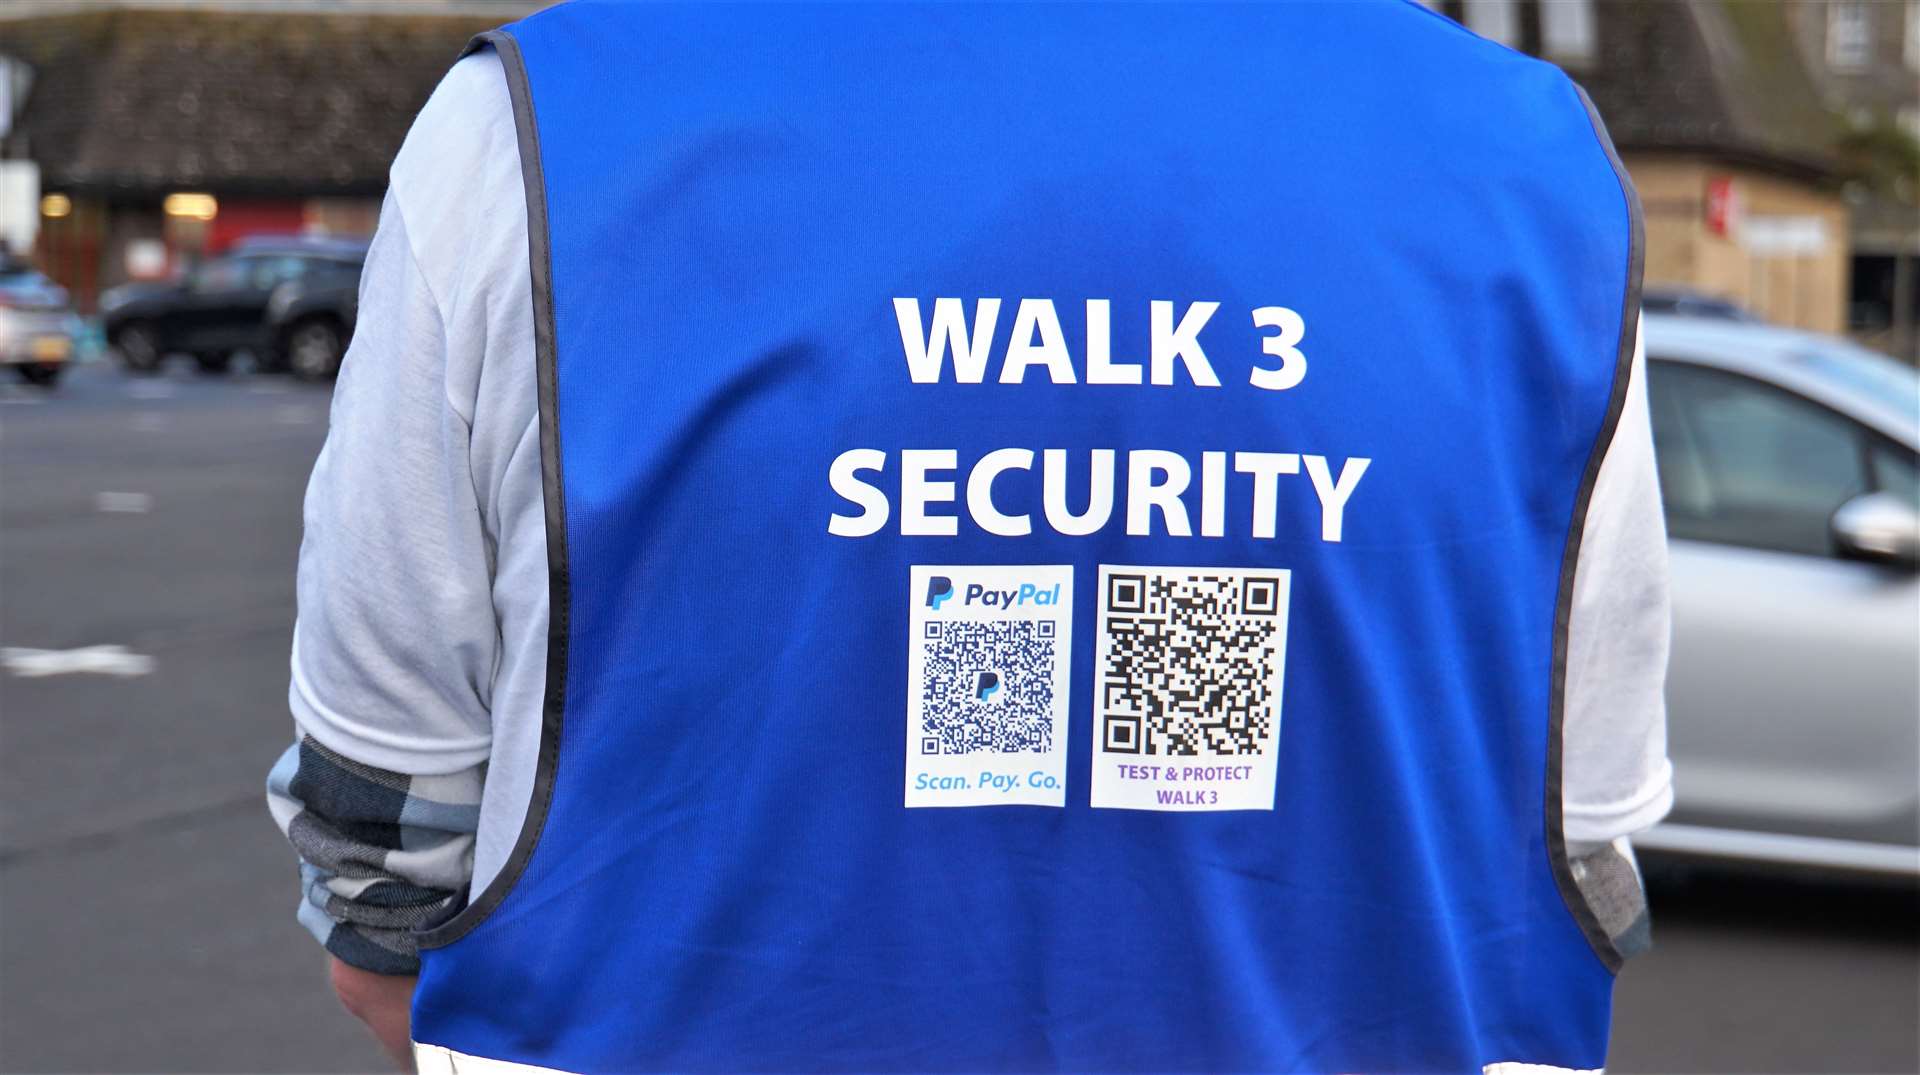 Iain has QR codes on his back that anyone can scan with their smartphone for further information. Picture: DGS